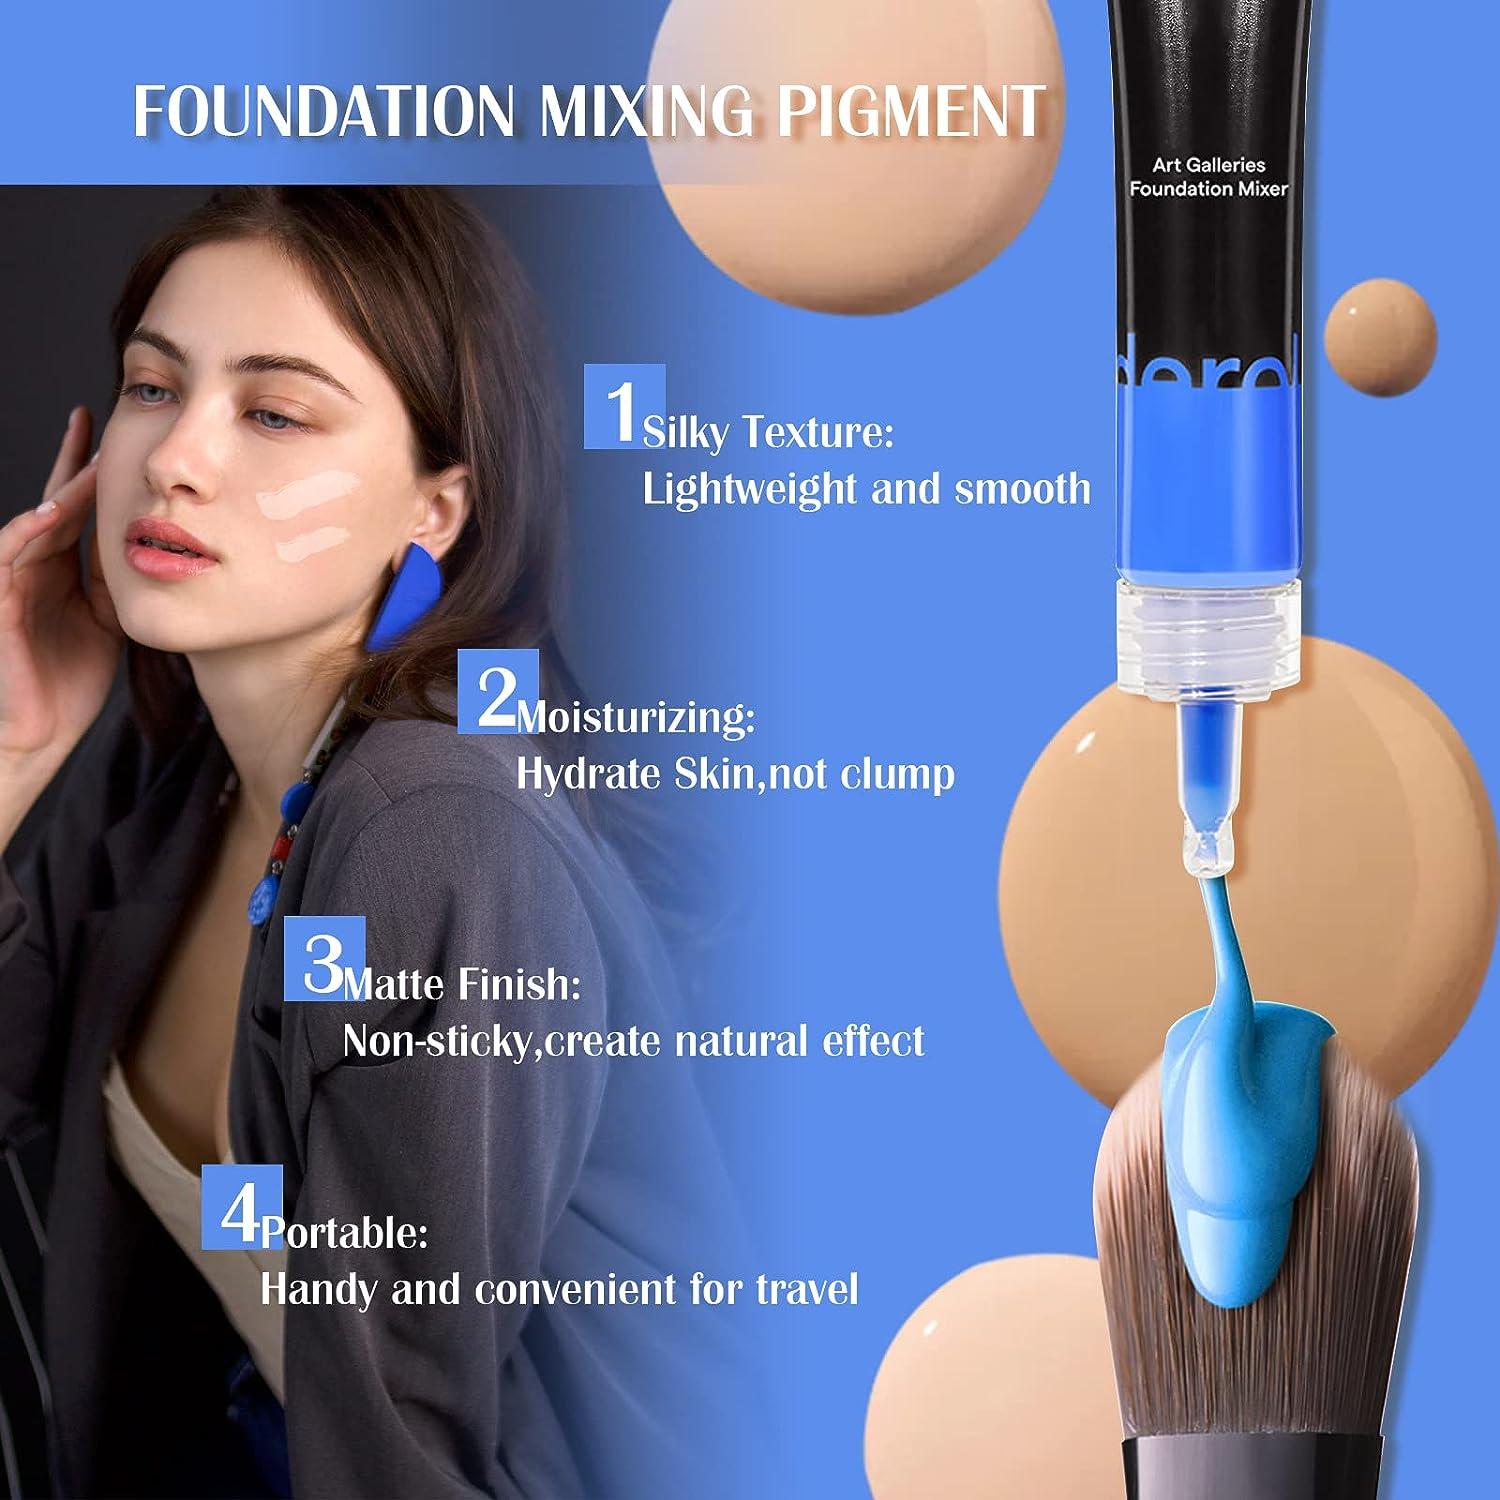 Pro.color Foundation Mixing Pigment- United States